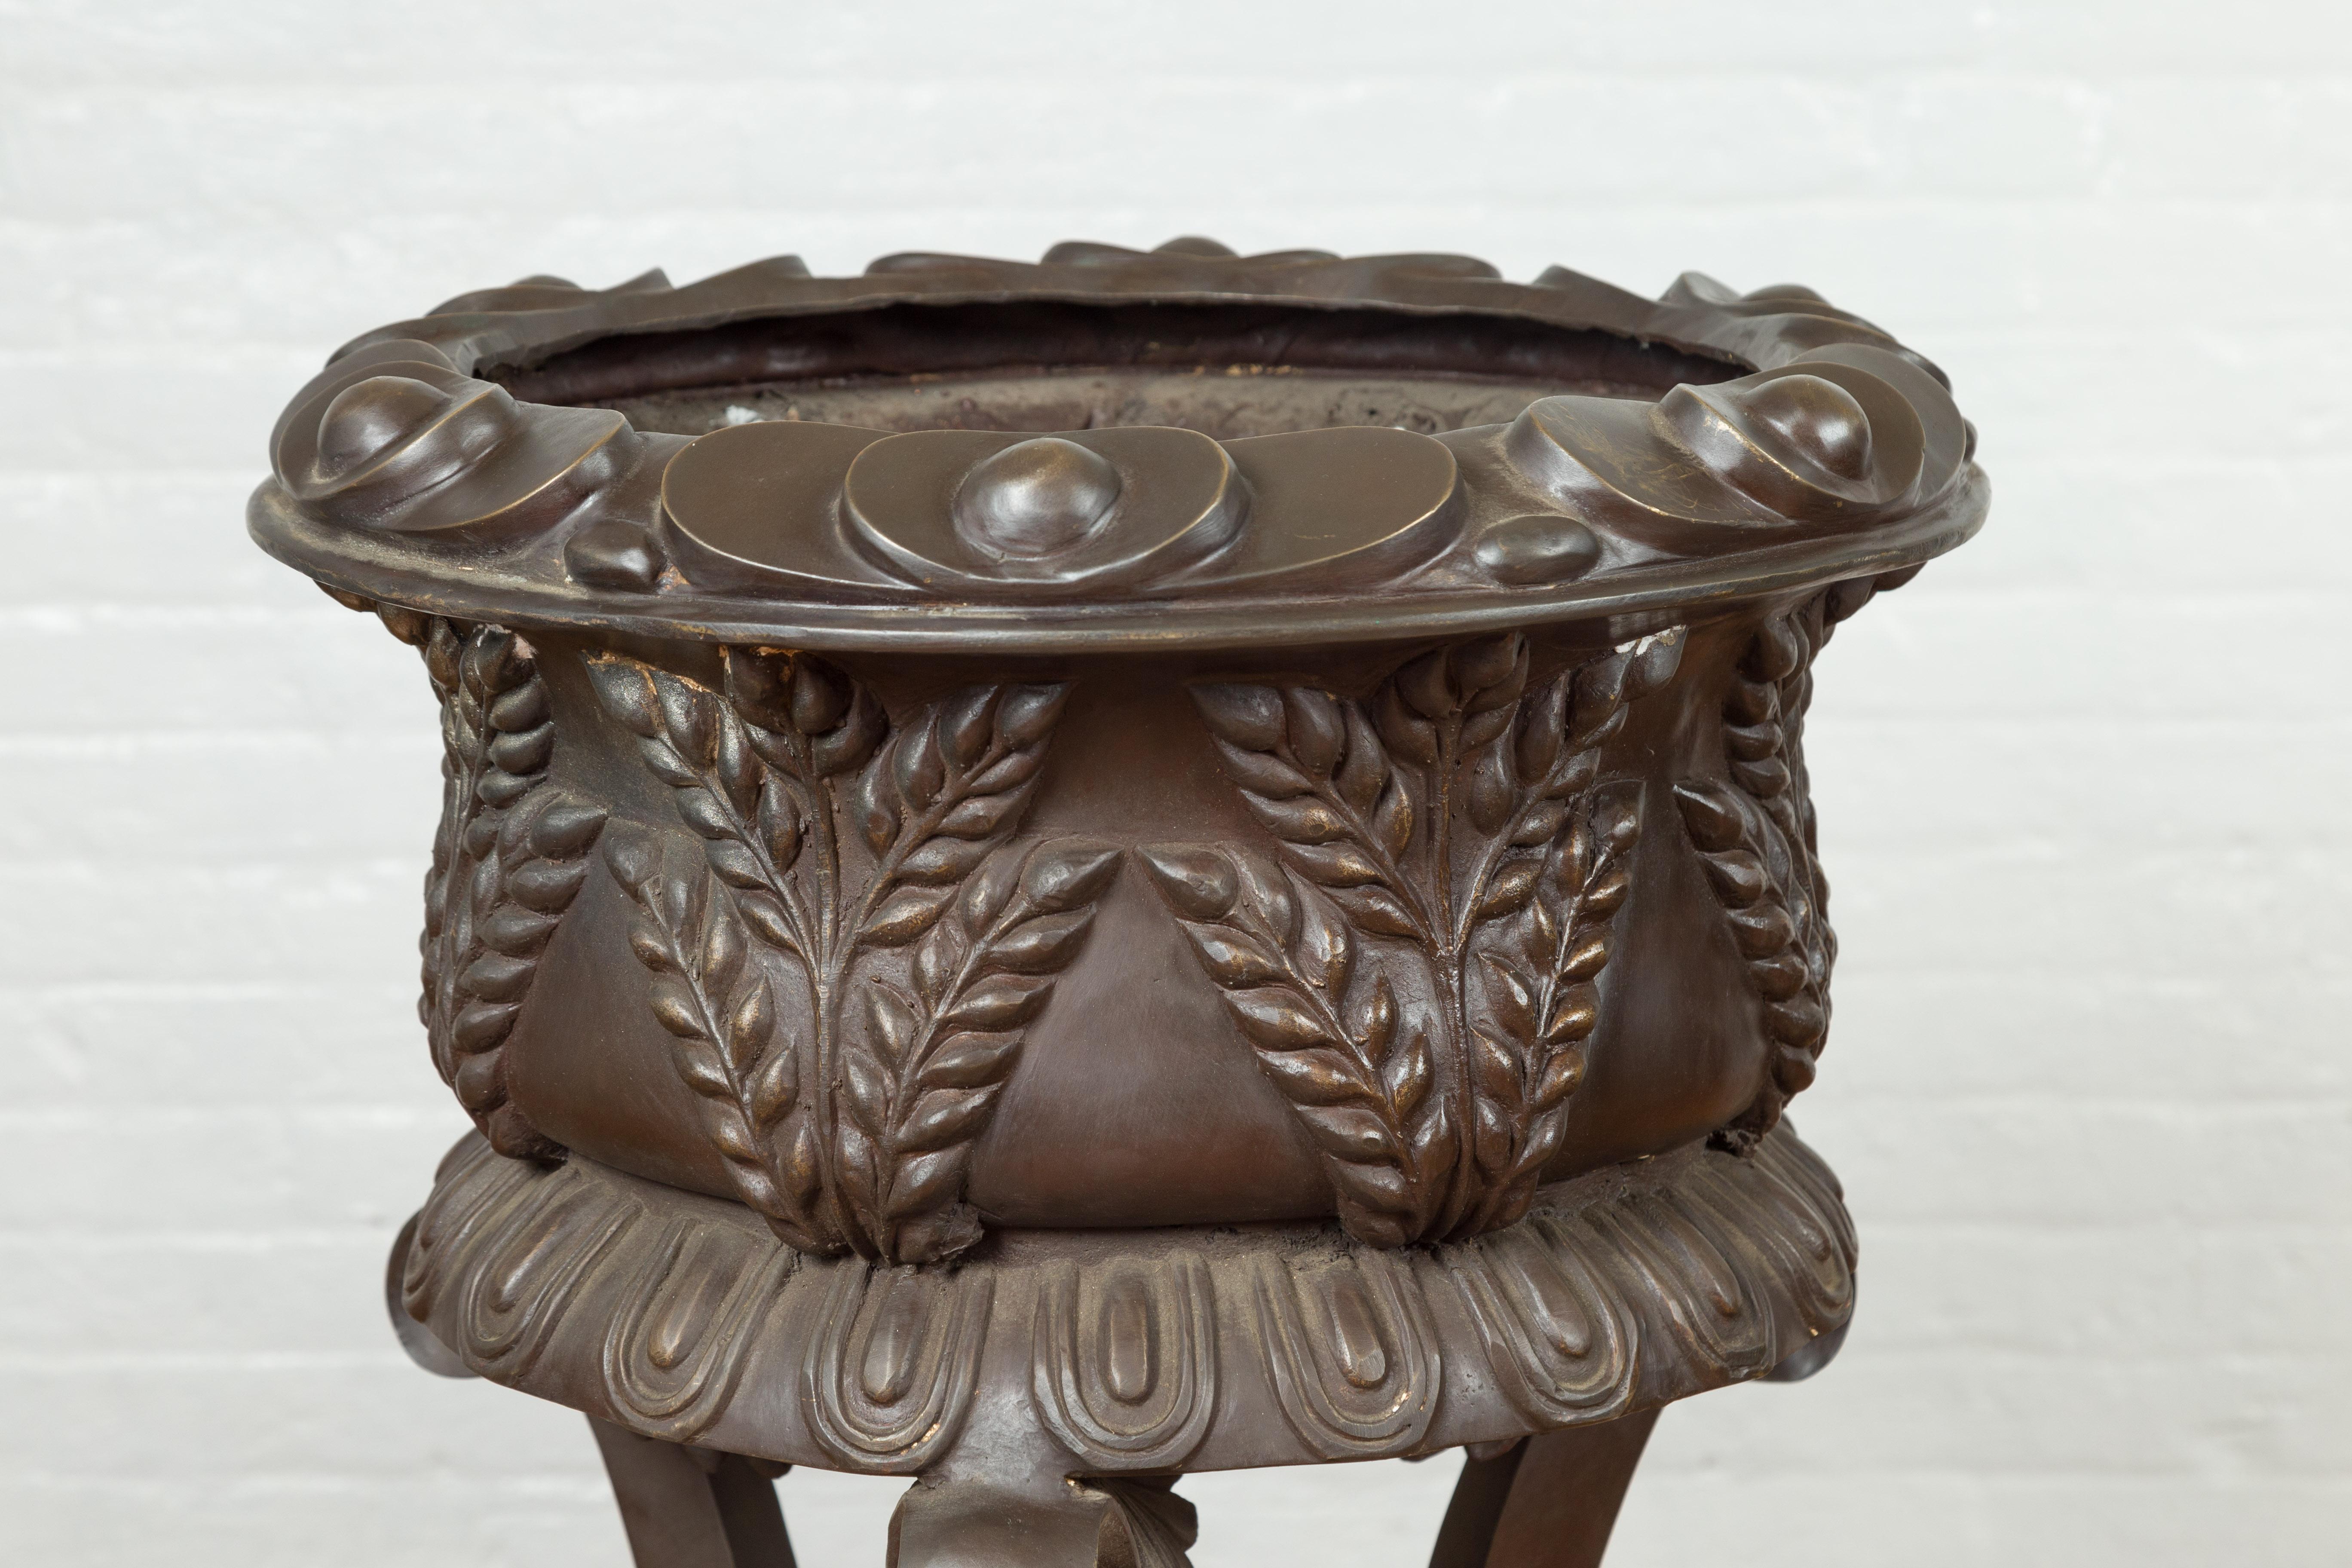 Cast Tall Vintage Bronze European Style Tripod Planter with Raised Floral Motifs For Sale